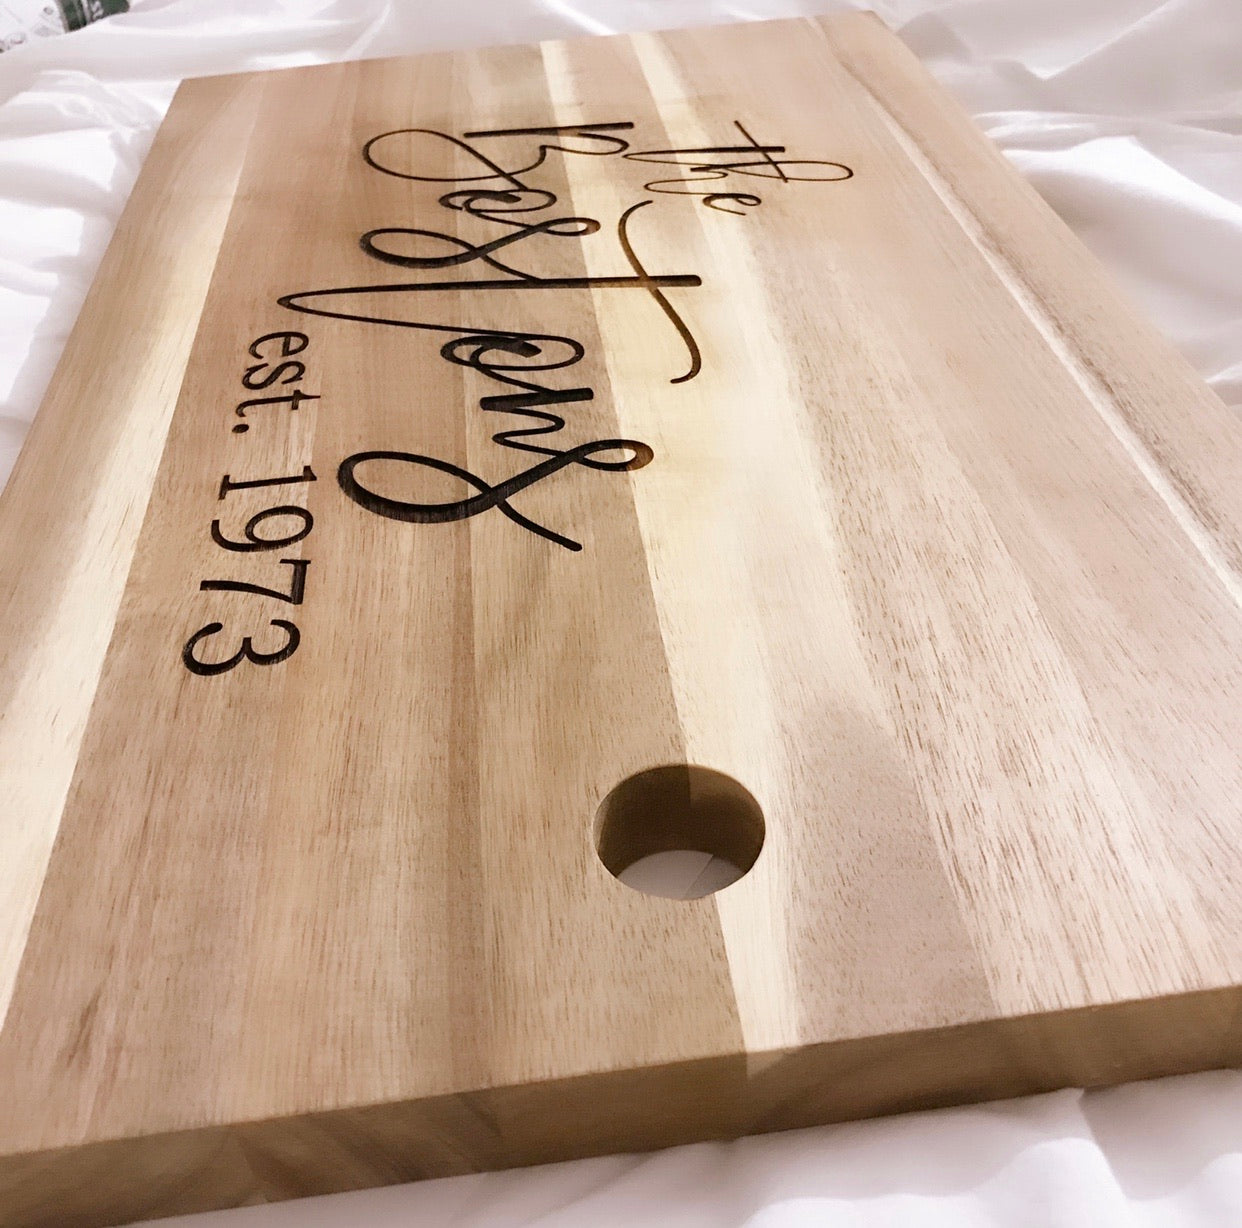 Personalized wooden cutting board, charcuterie board, available online at The Chic Greek Store.